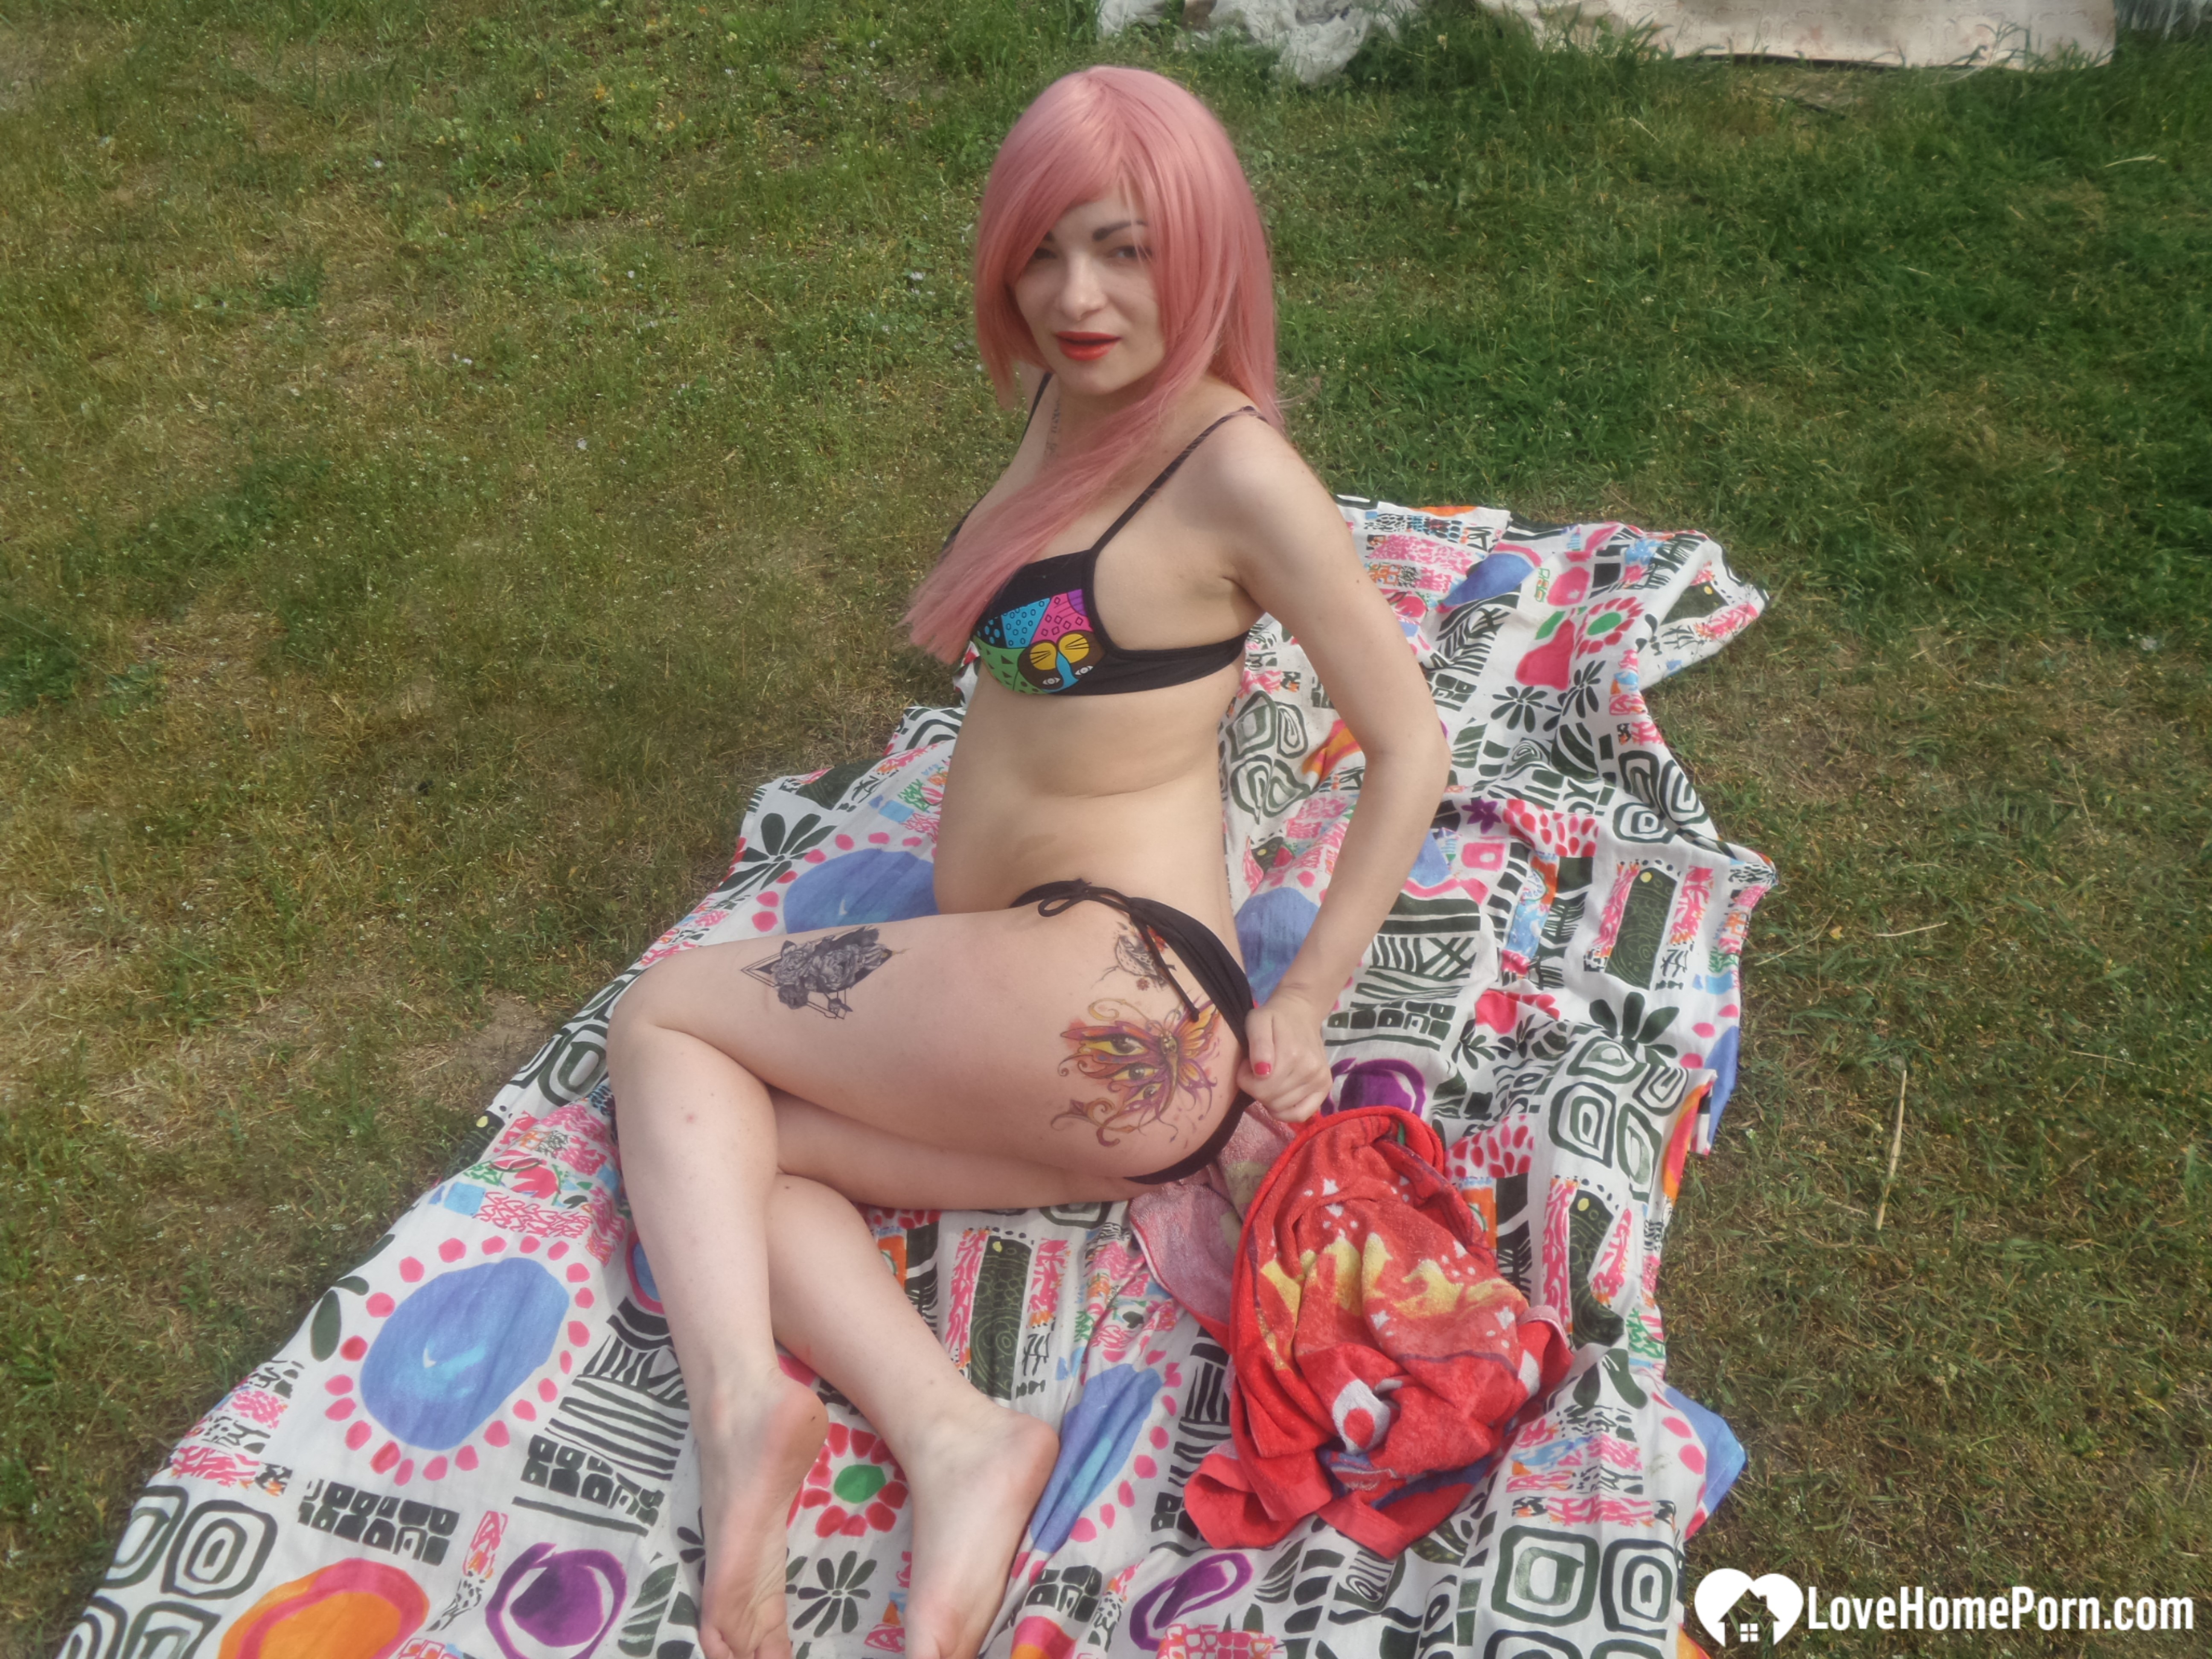 Pink-haired beauty plays with her love tunnel